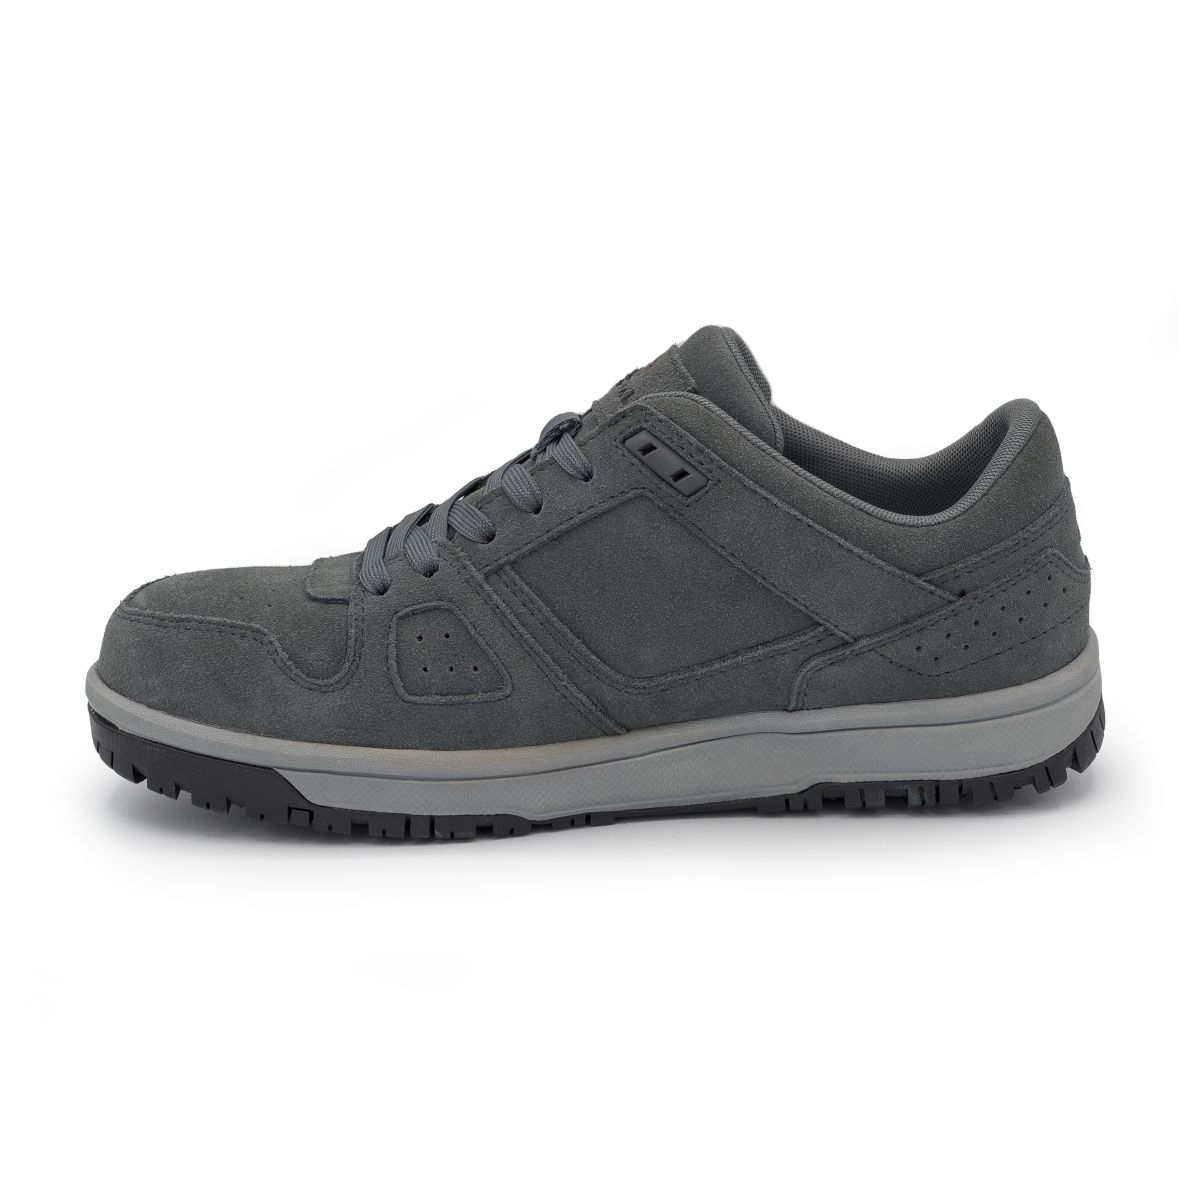 AIRWALK SAFETY Men's Mongo Composite Toe EH Work Shoe Charcoal/Grey - AW6301 CHARCOAL/GRAY - CHARCOAL/GRAY, 10-M